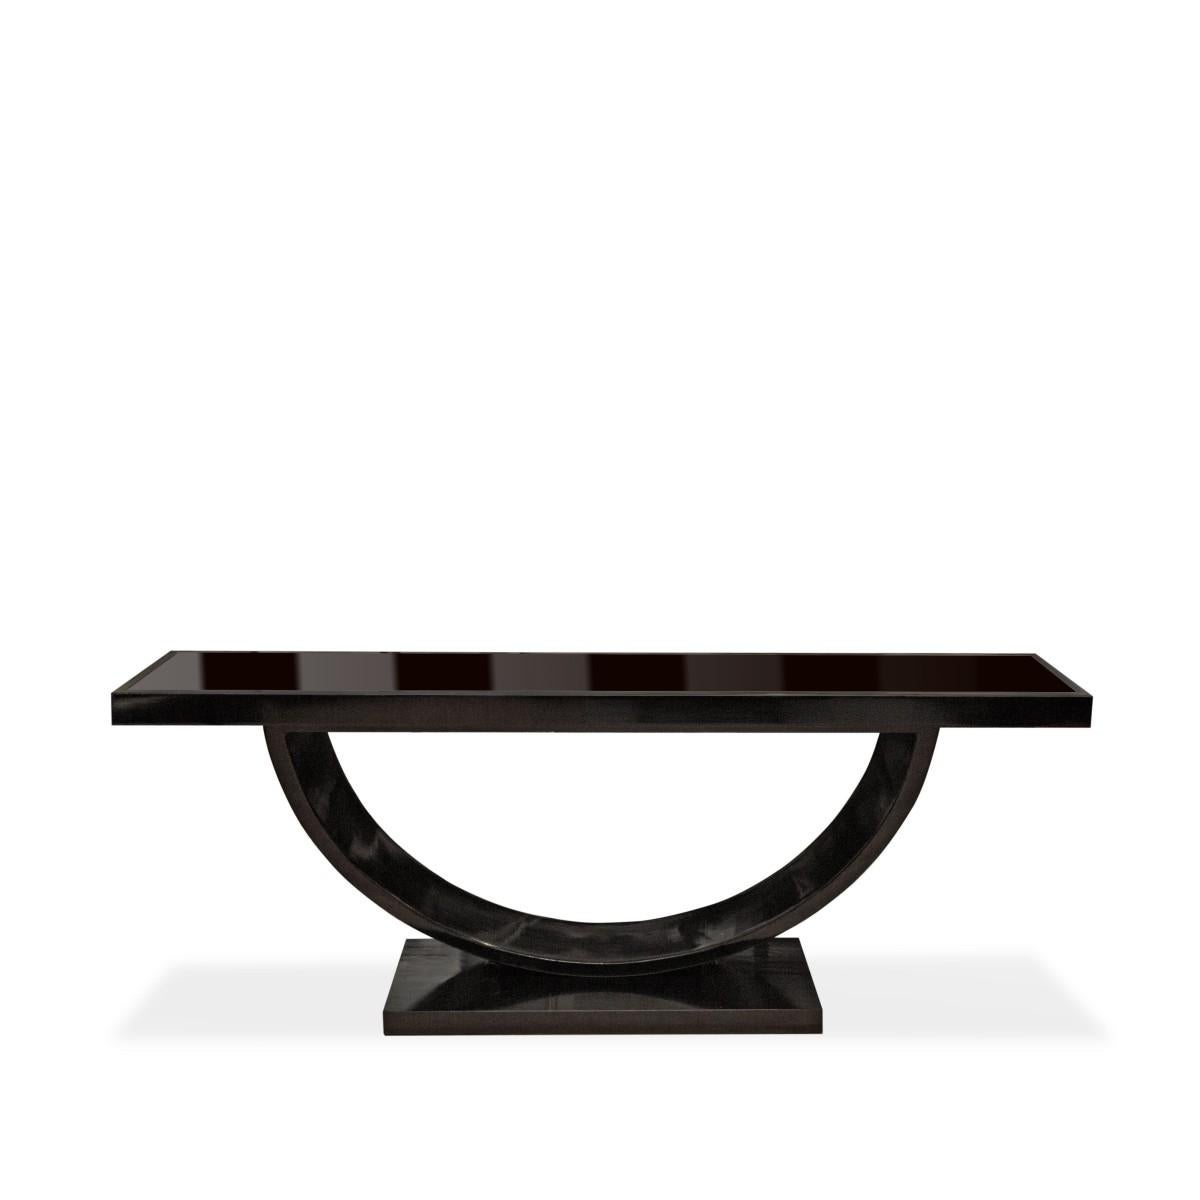 A custom made Art Deco style wood console table in high gloss black lacquer finish. Locally made in Brooklyn, NY. Please note that the finish, color and size may be customized as desired. Allow 4 to 6 weeks for delivery.

Dimensions as shown: 73